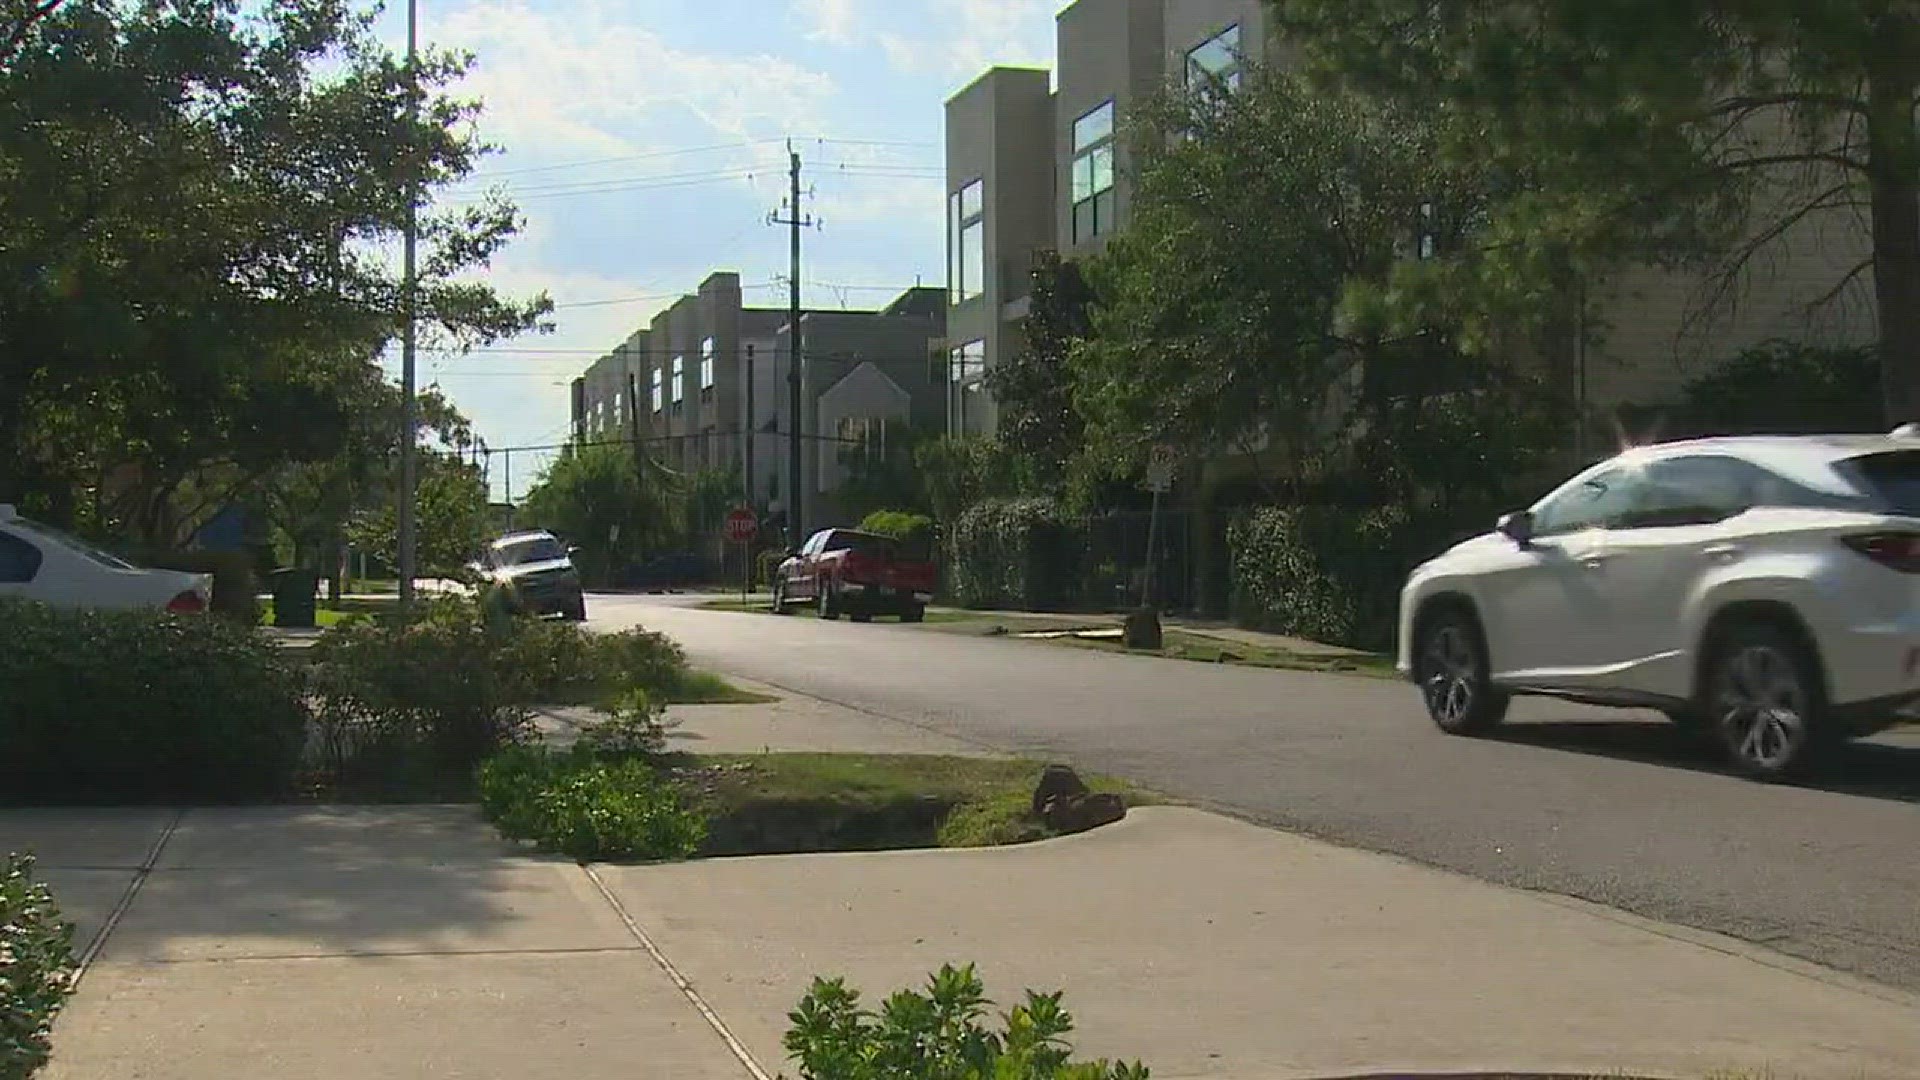 A Houston man fed up with crooks goes to extremes to protect not only his home, but also his neighbors.